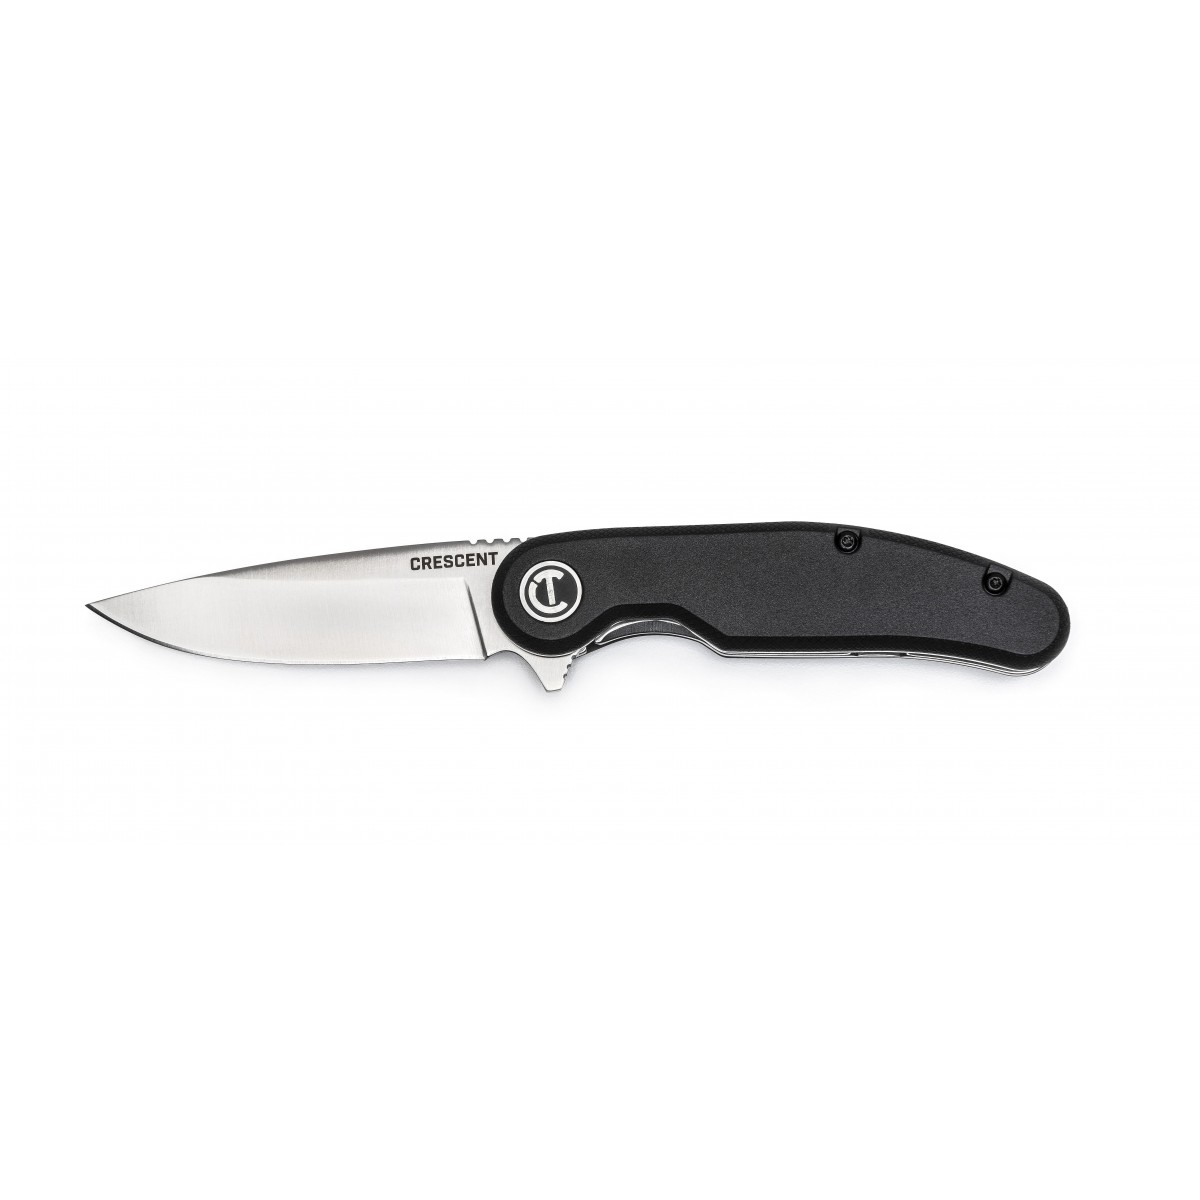 CPK325C Pocket Knife, 3-1/4 in L Blade, 1 in W Blade, Stainless Steel Blade, Straight, Ergonomic Handle